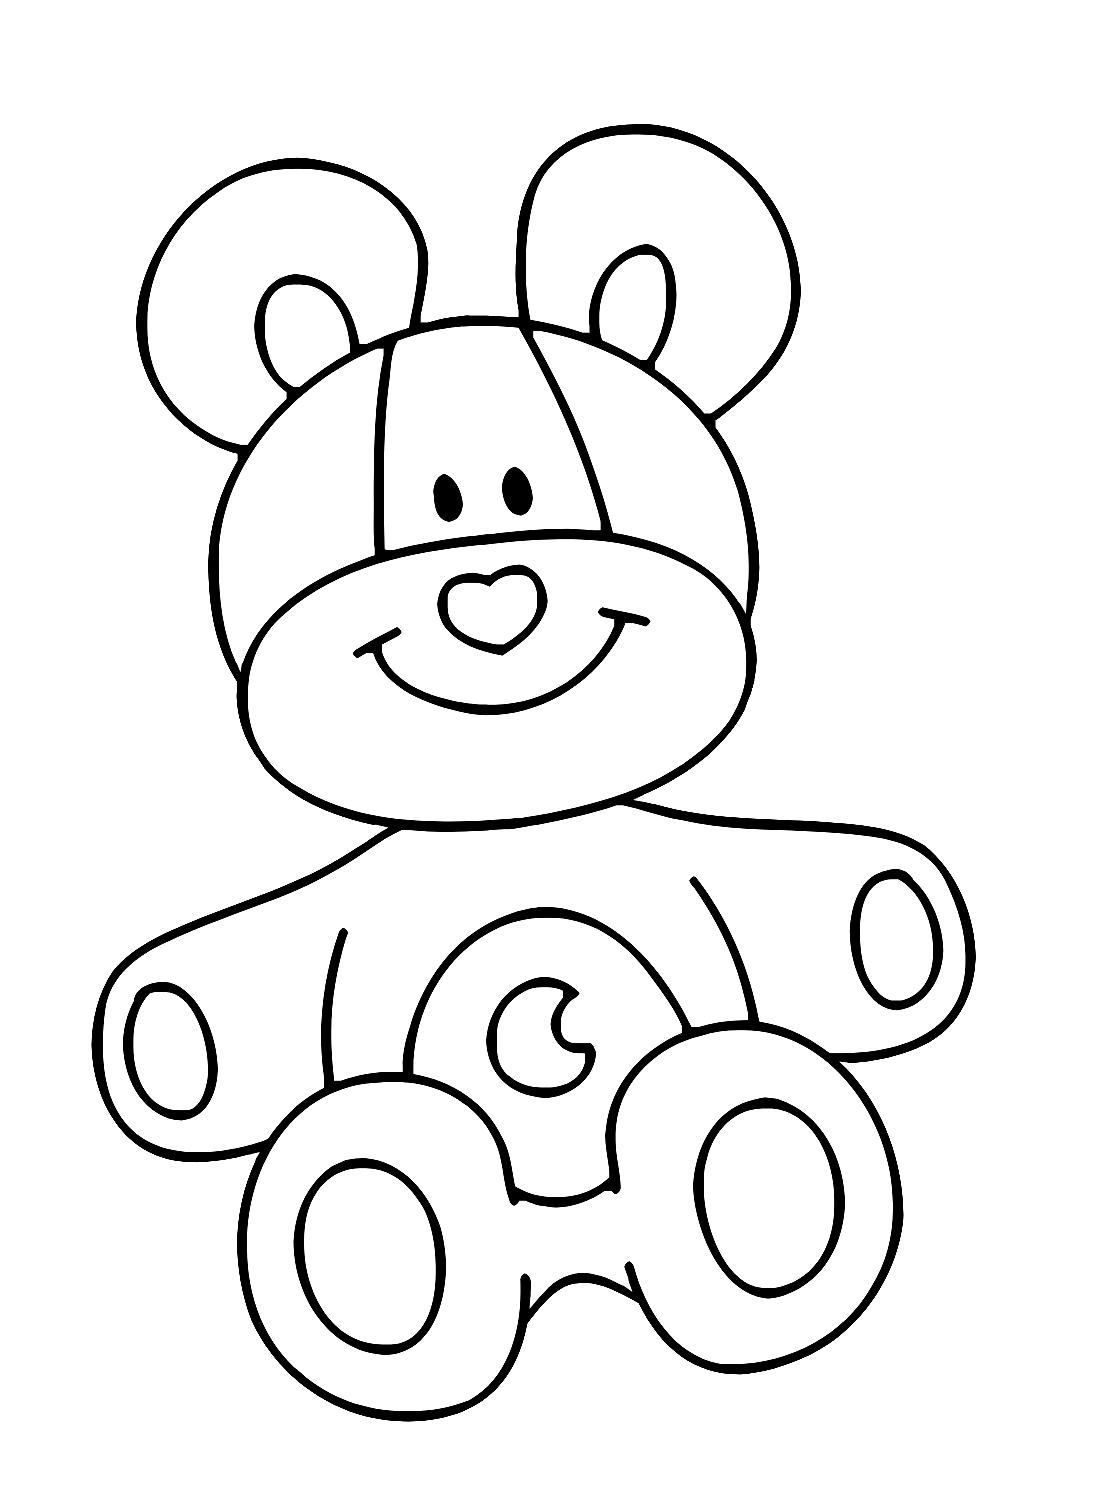 Toys coloring pages printable for free download